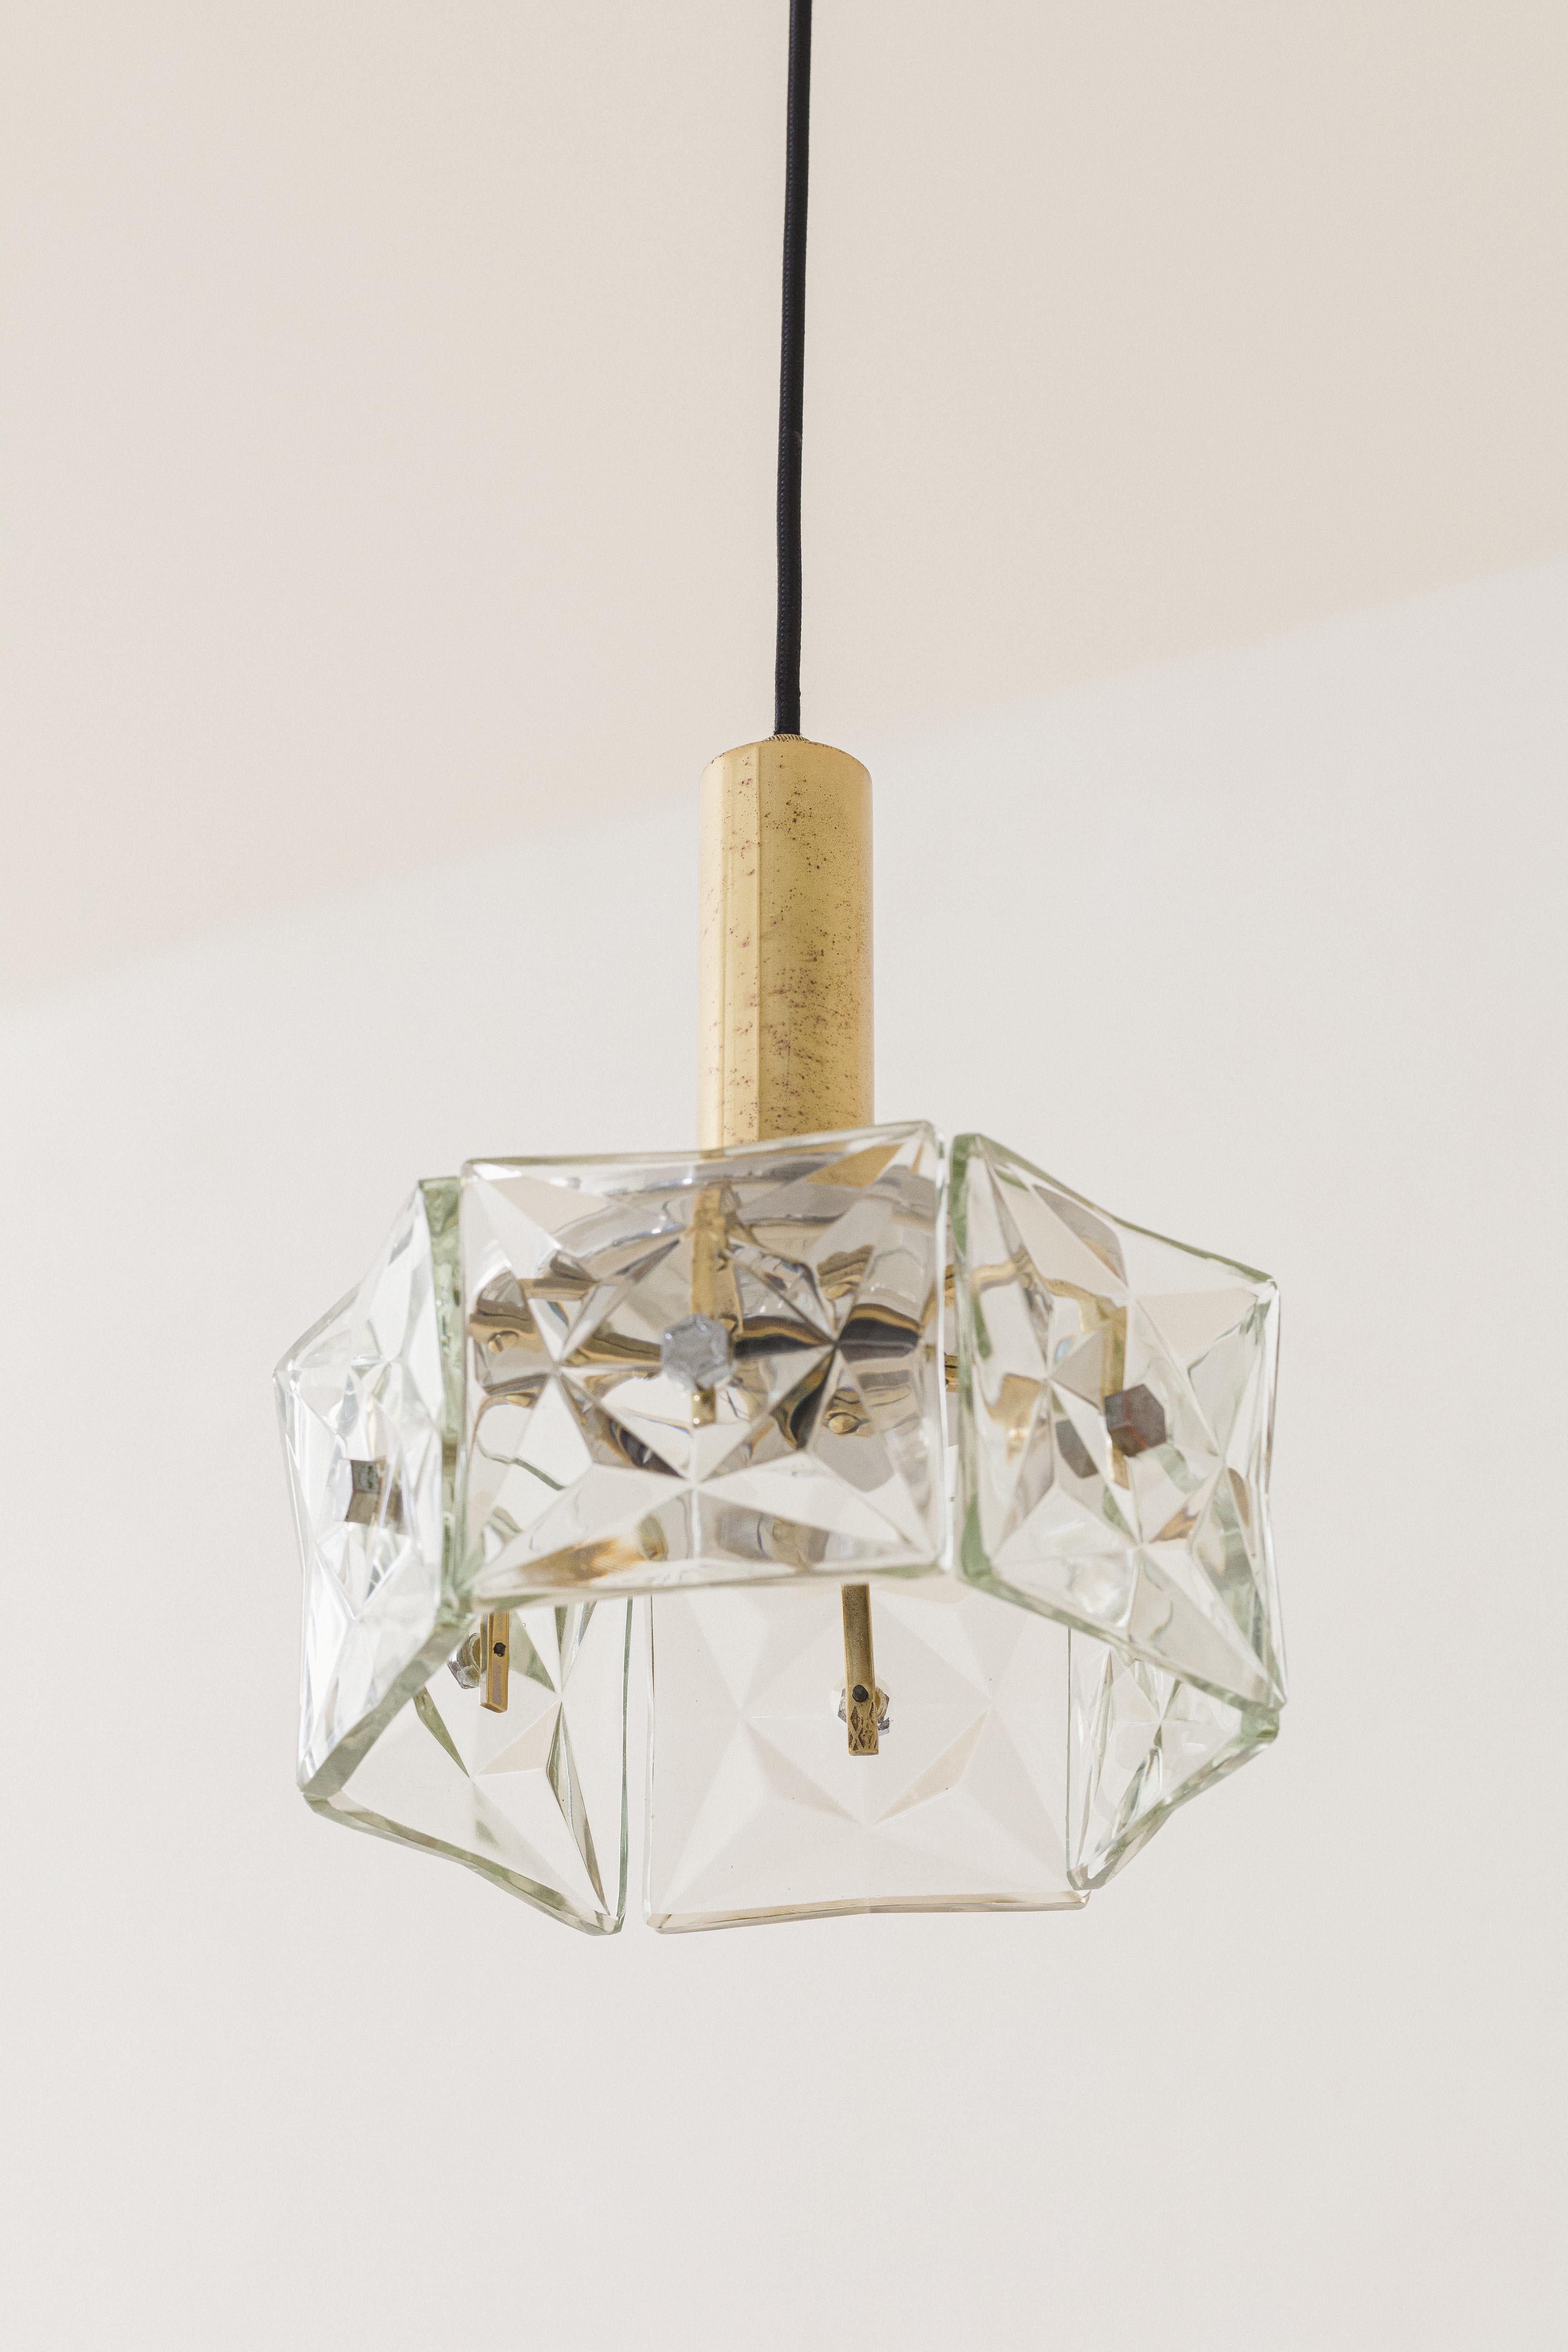 Vintage Pendant Lamp by Lustres Pelotas, Brass and Prismatic Glass, Brazil 1950s For Sale 1